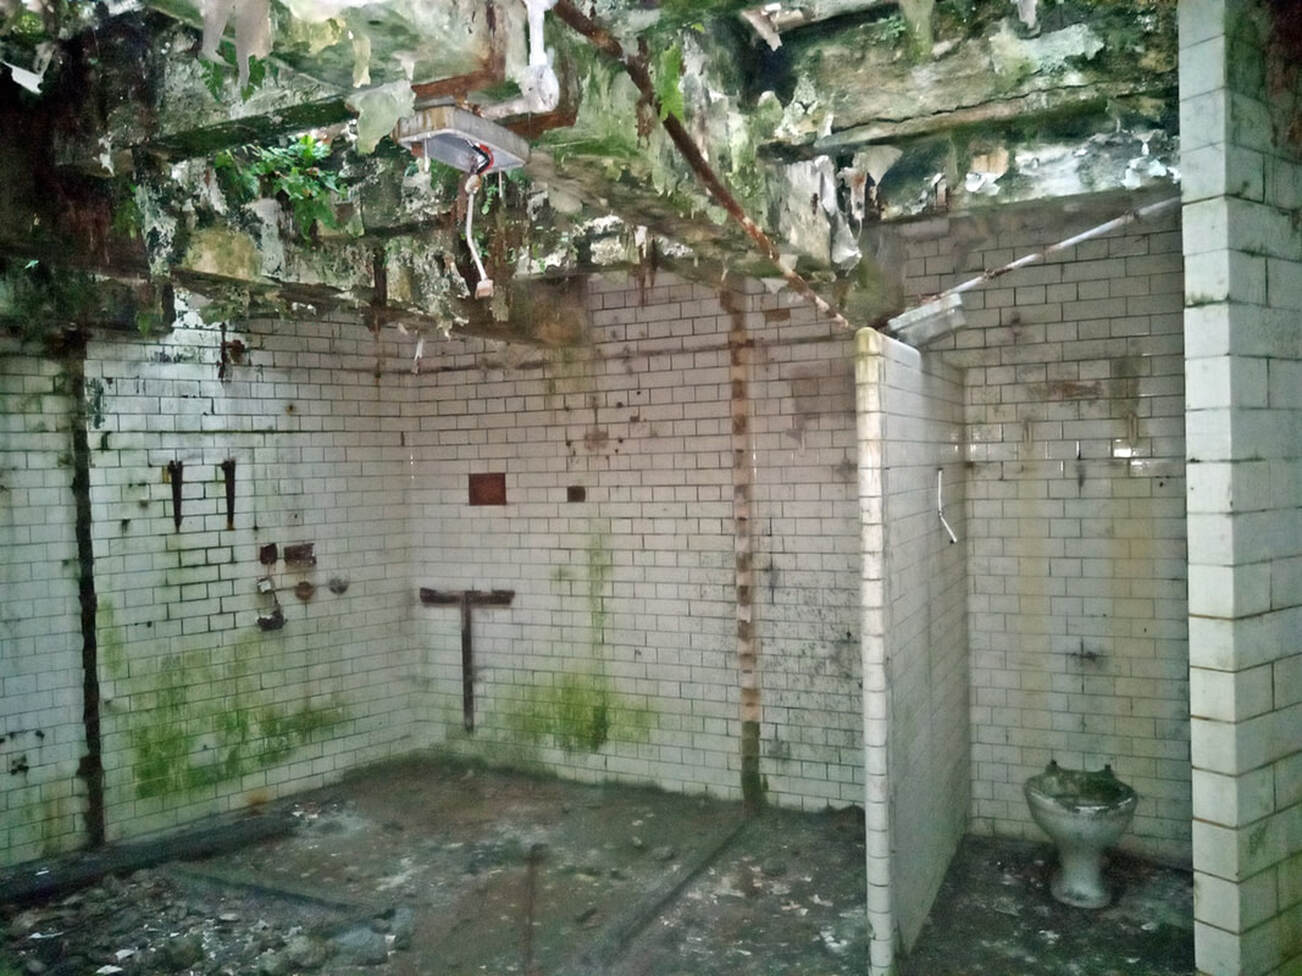 Picture of derelict London public toilets disused for several decades